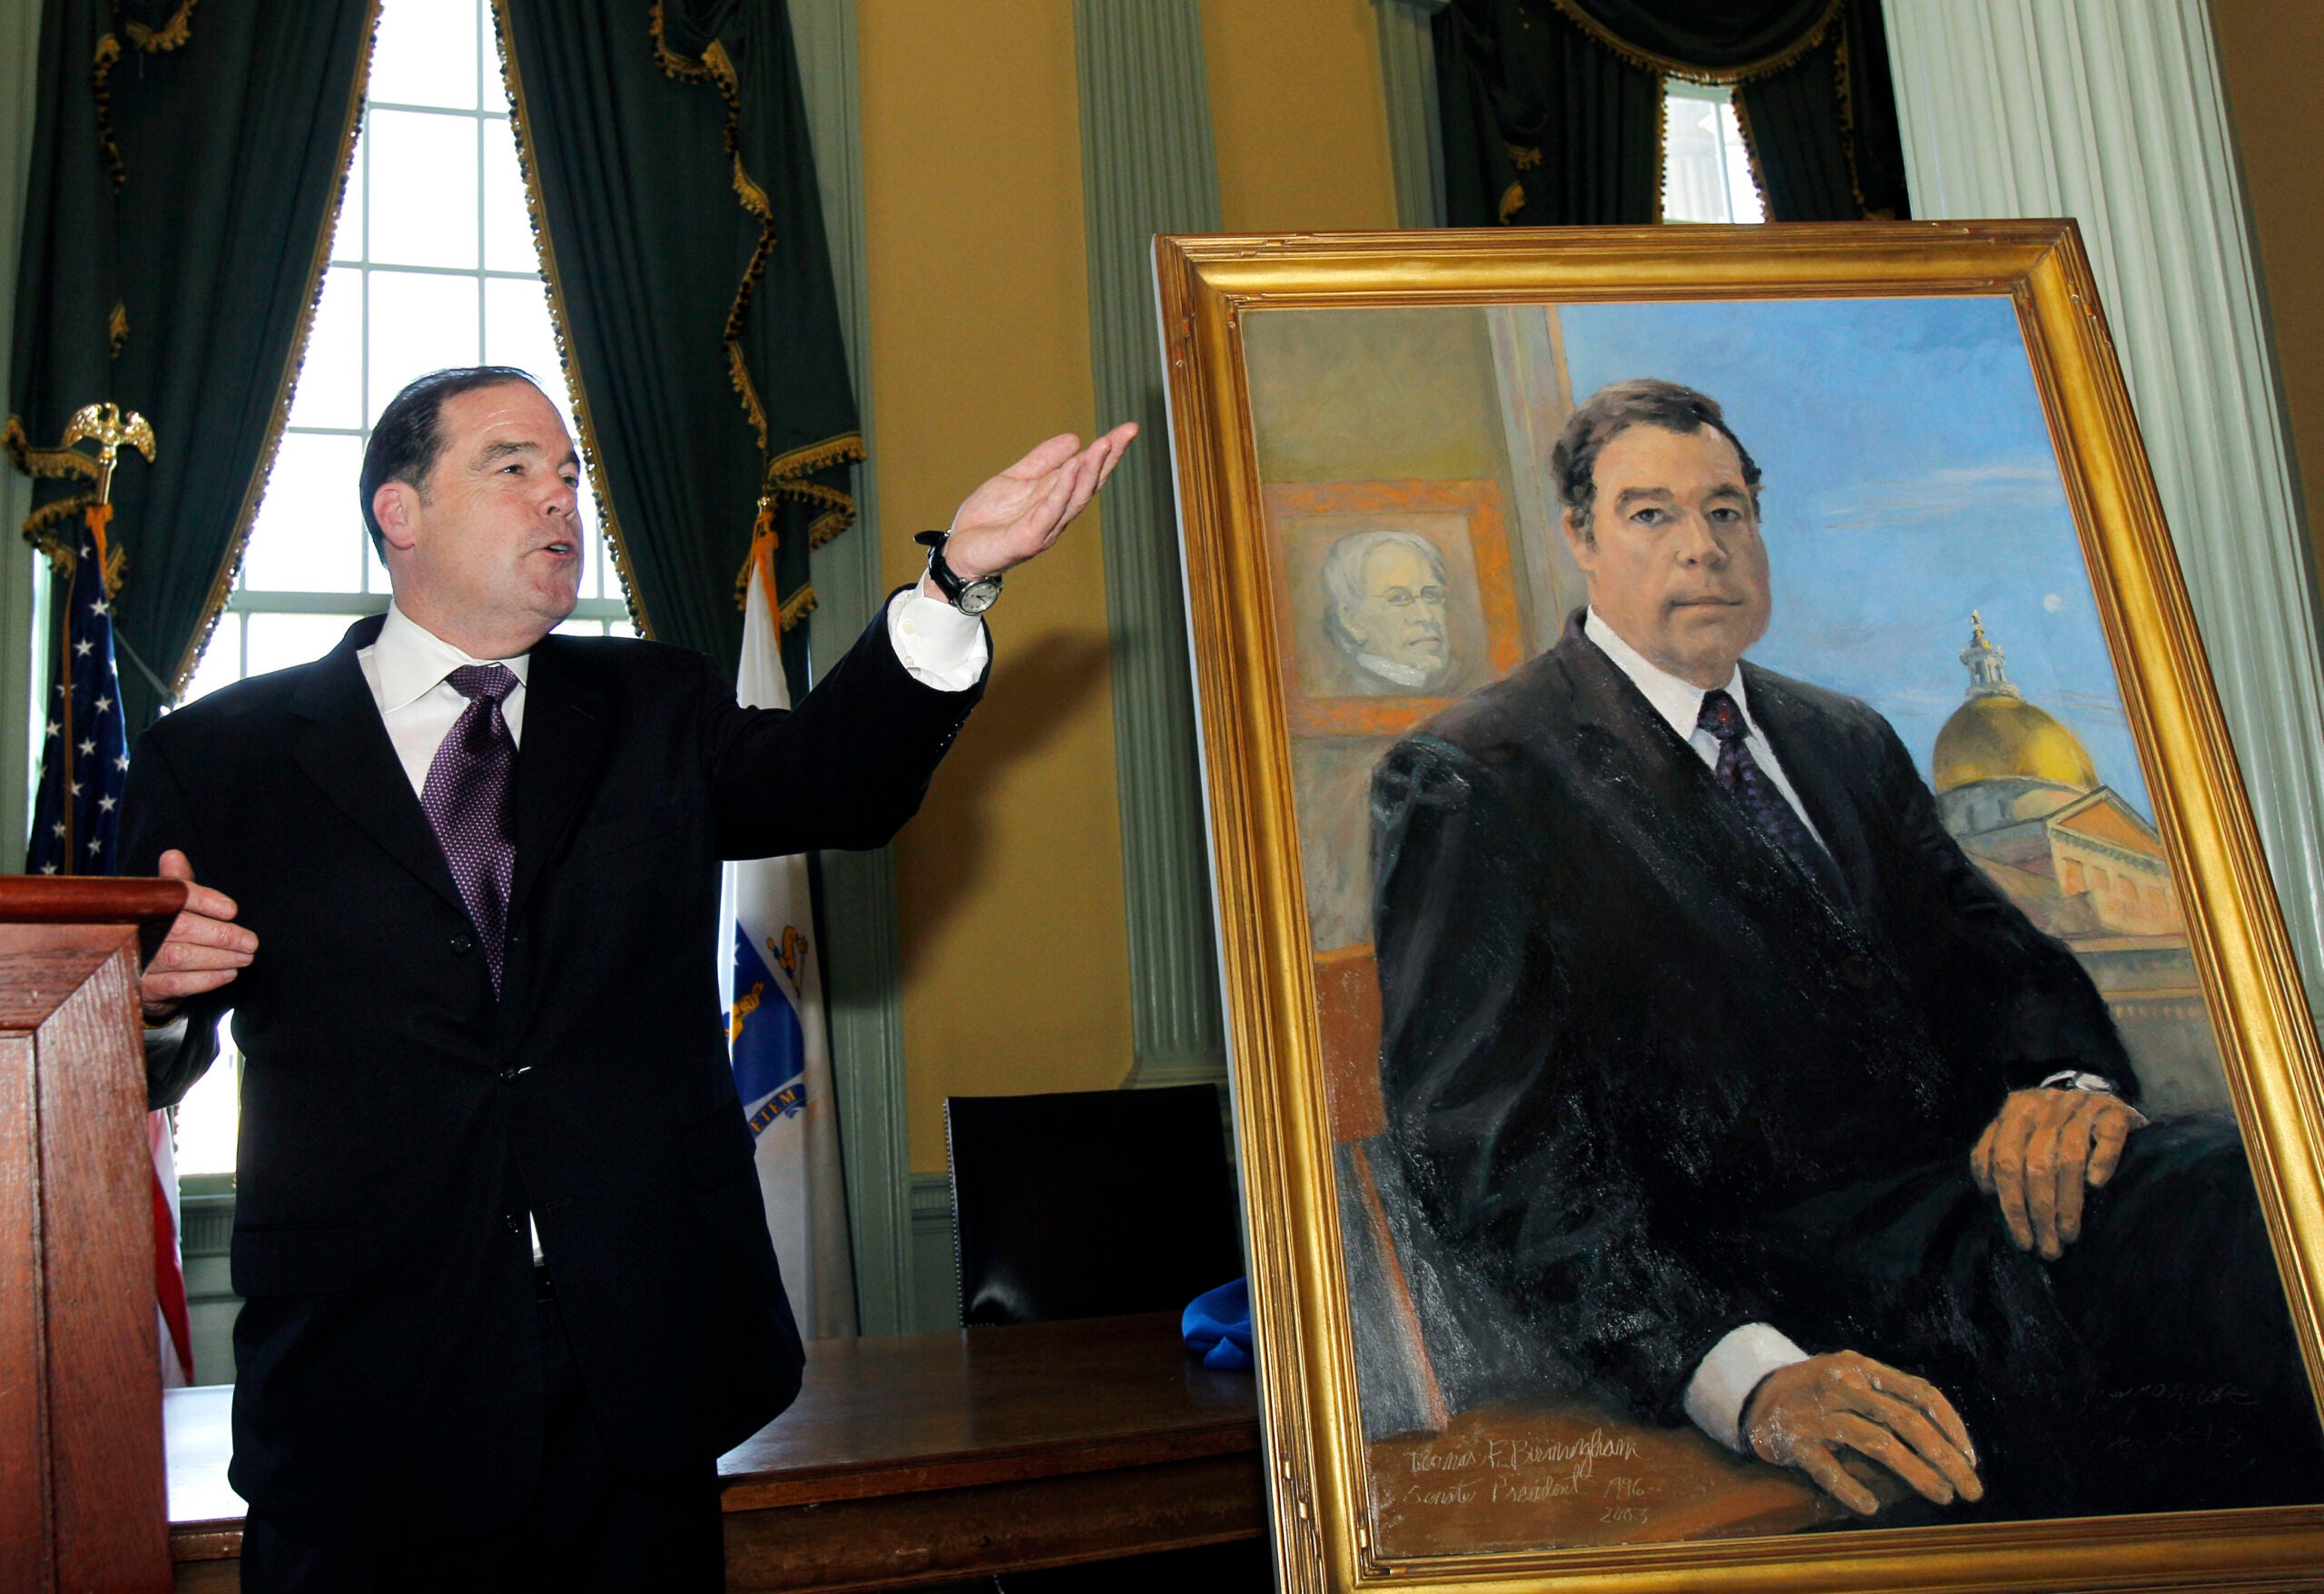 alt = Former Massachusetts Senate President Thomas Birmingham of Chelsea, Mass. gestures as he unveils his official portrait at the Statehouse in Boston Thursday, May 12, 2011.